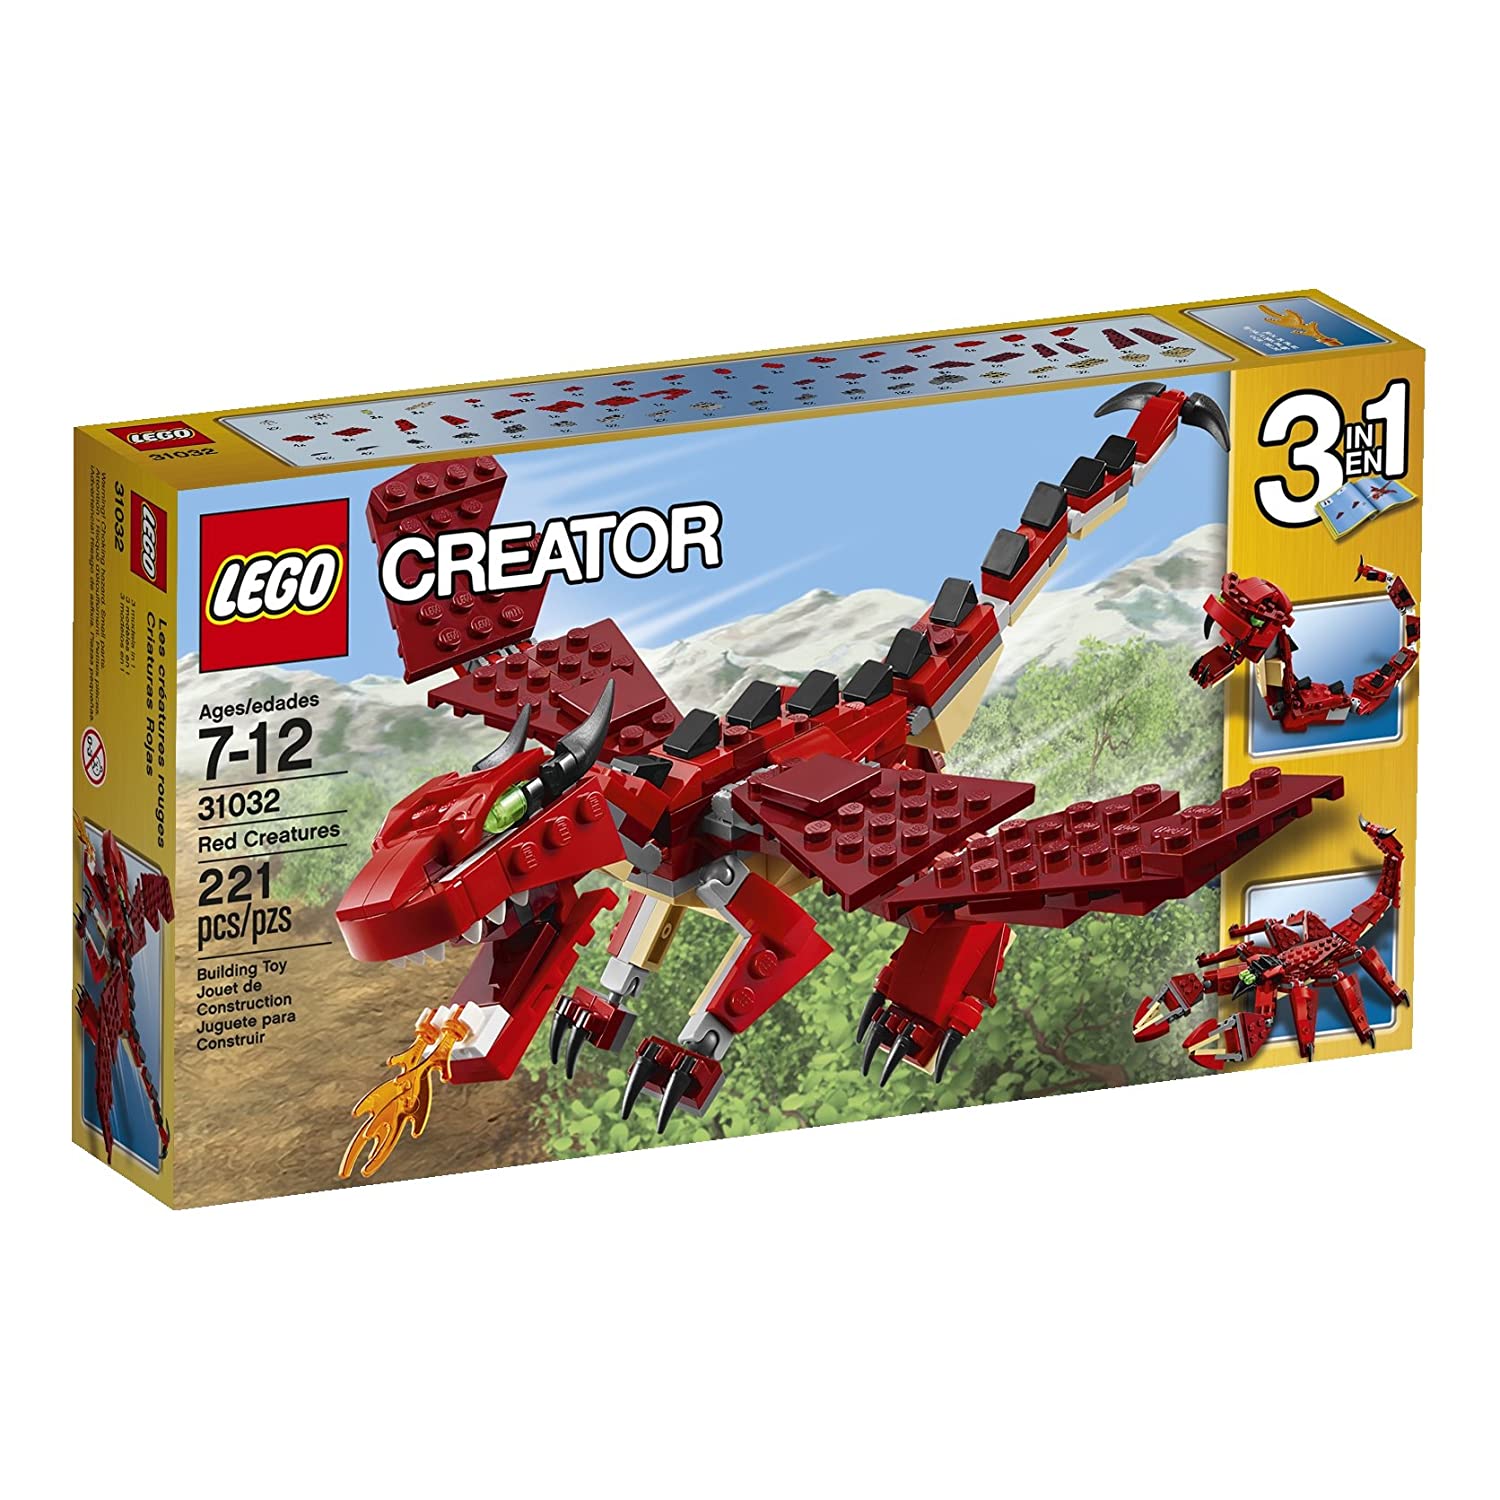 Top 9 Best LEGO Animals Sets Reviews in 2022 4